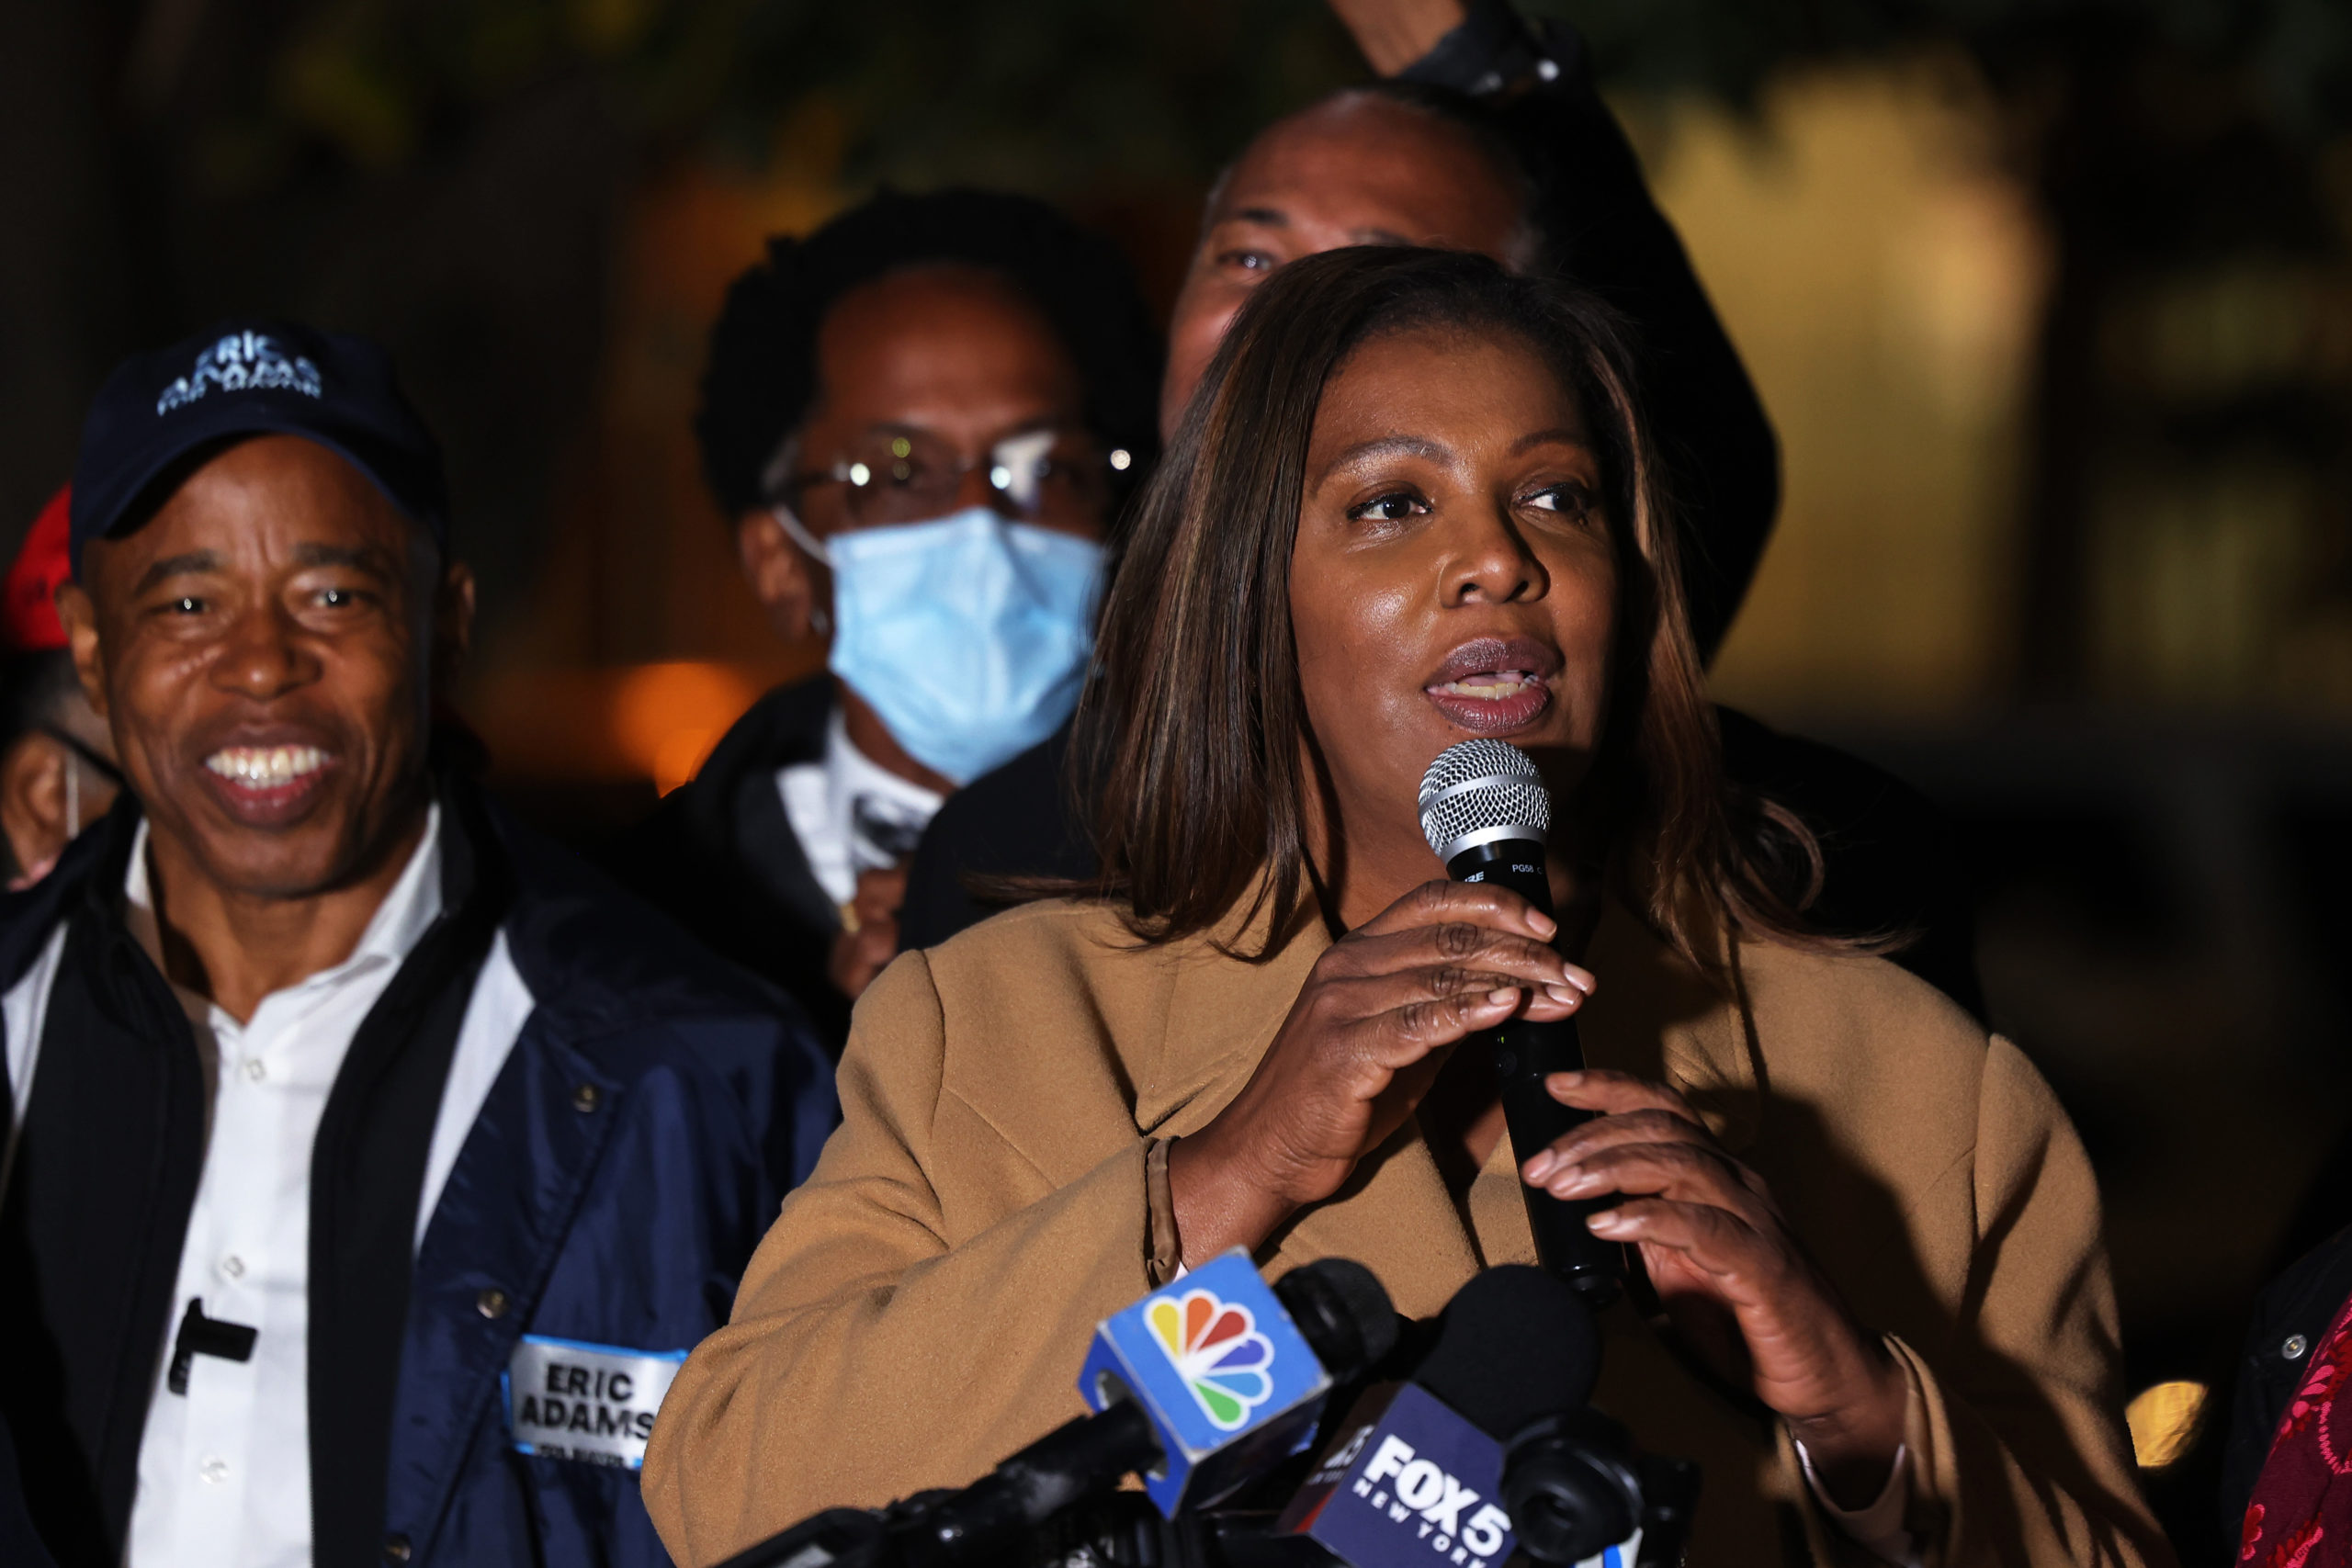 NEW YORK, NEW YORK - NOVEMBER 01: State Attorney General and gubernatorial candidate Letitia James speaks during a Get Out the Vote rally at A. Philip Randolph Square in Harlem on November 01, 2021 in New York City. Adams, state Attorney General and gubernatorial candidate Letitia James, Lt. Gov. Brian Benjamin, district attorney candidate Alvin Bragg and other party candidates along with district and community leaders attended the rally. (Photo by Michael M. Santiago/Getty Images)